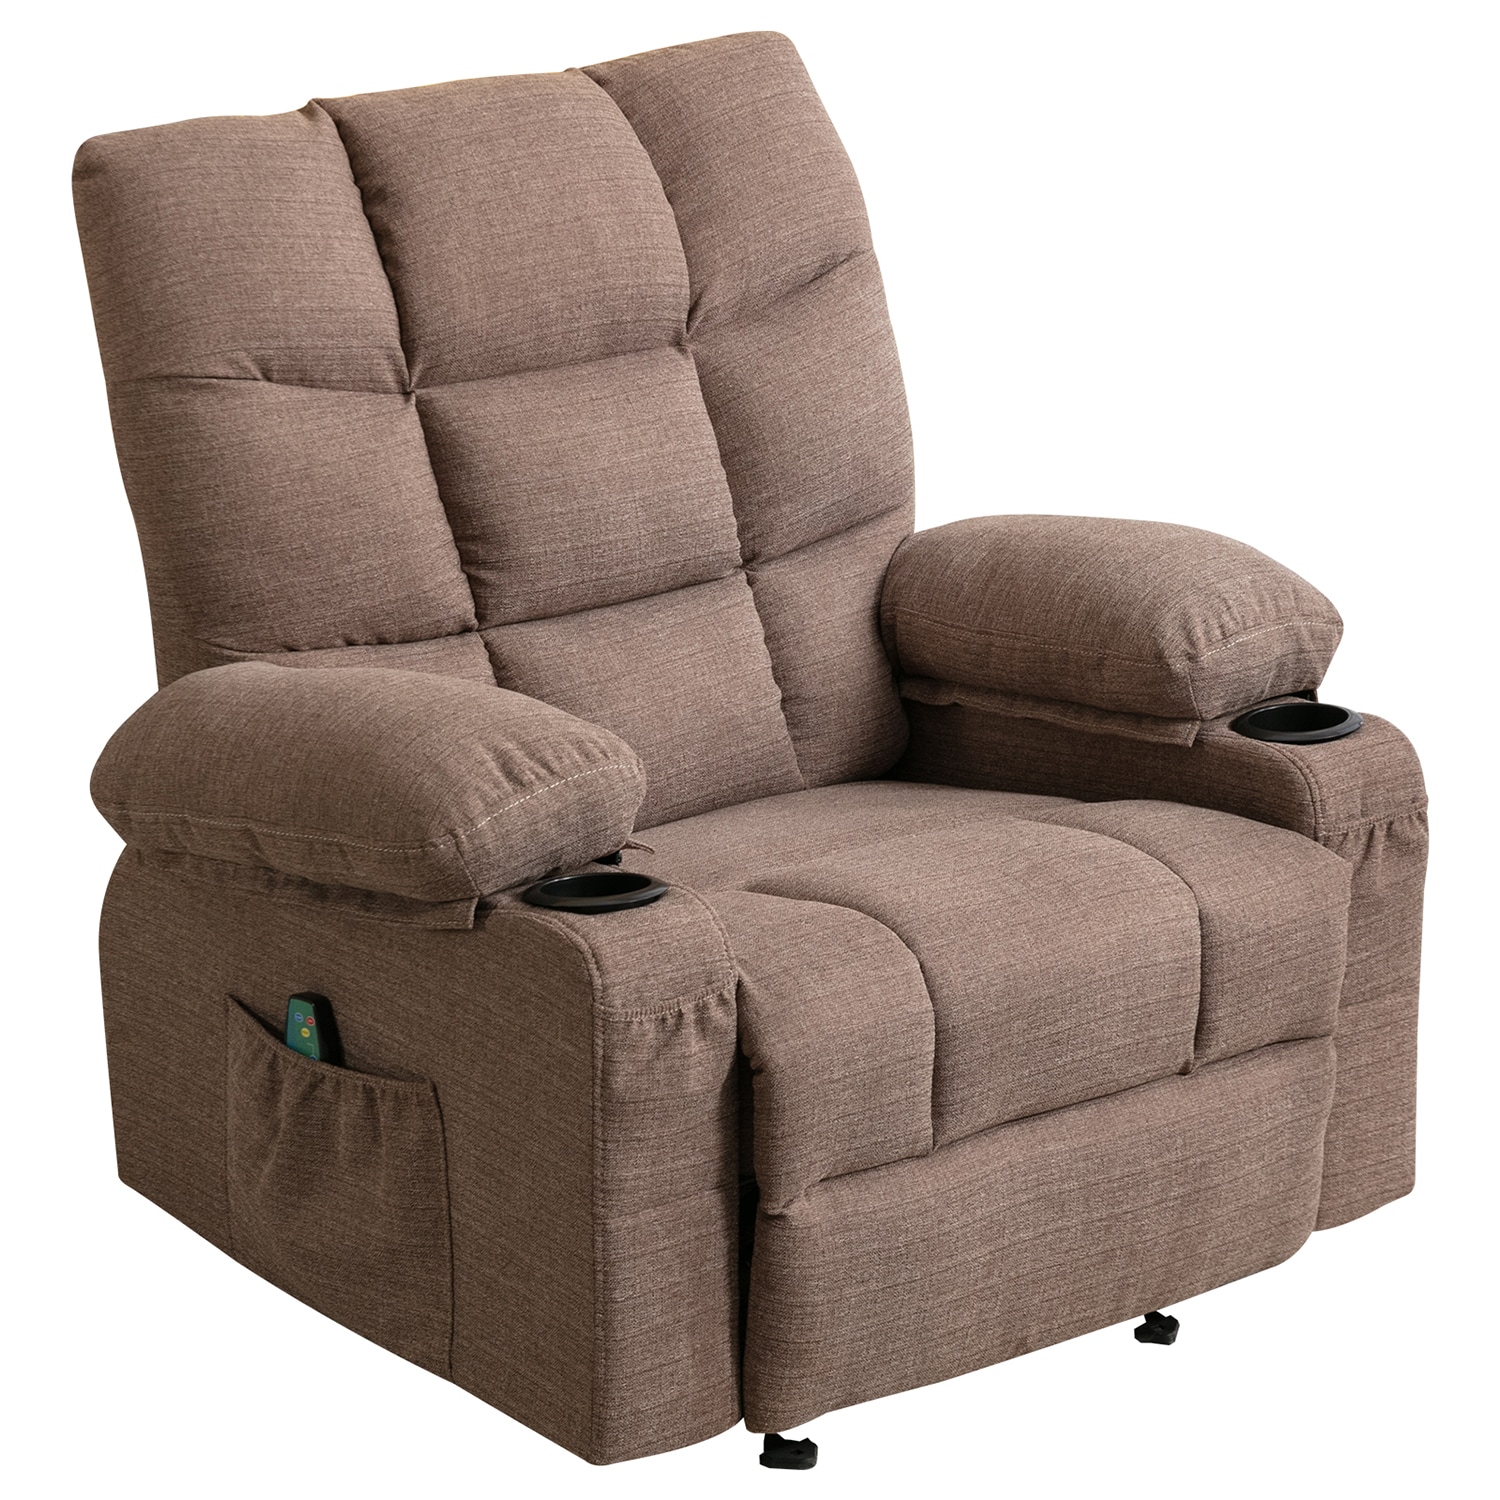 Green Fabric Rocker Massage Chair Electric Power Lift Recliner Chair with Heat, Cup Holders and Side Pockets